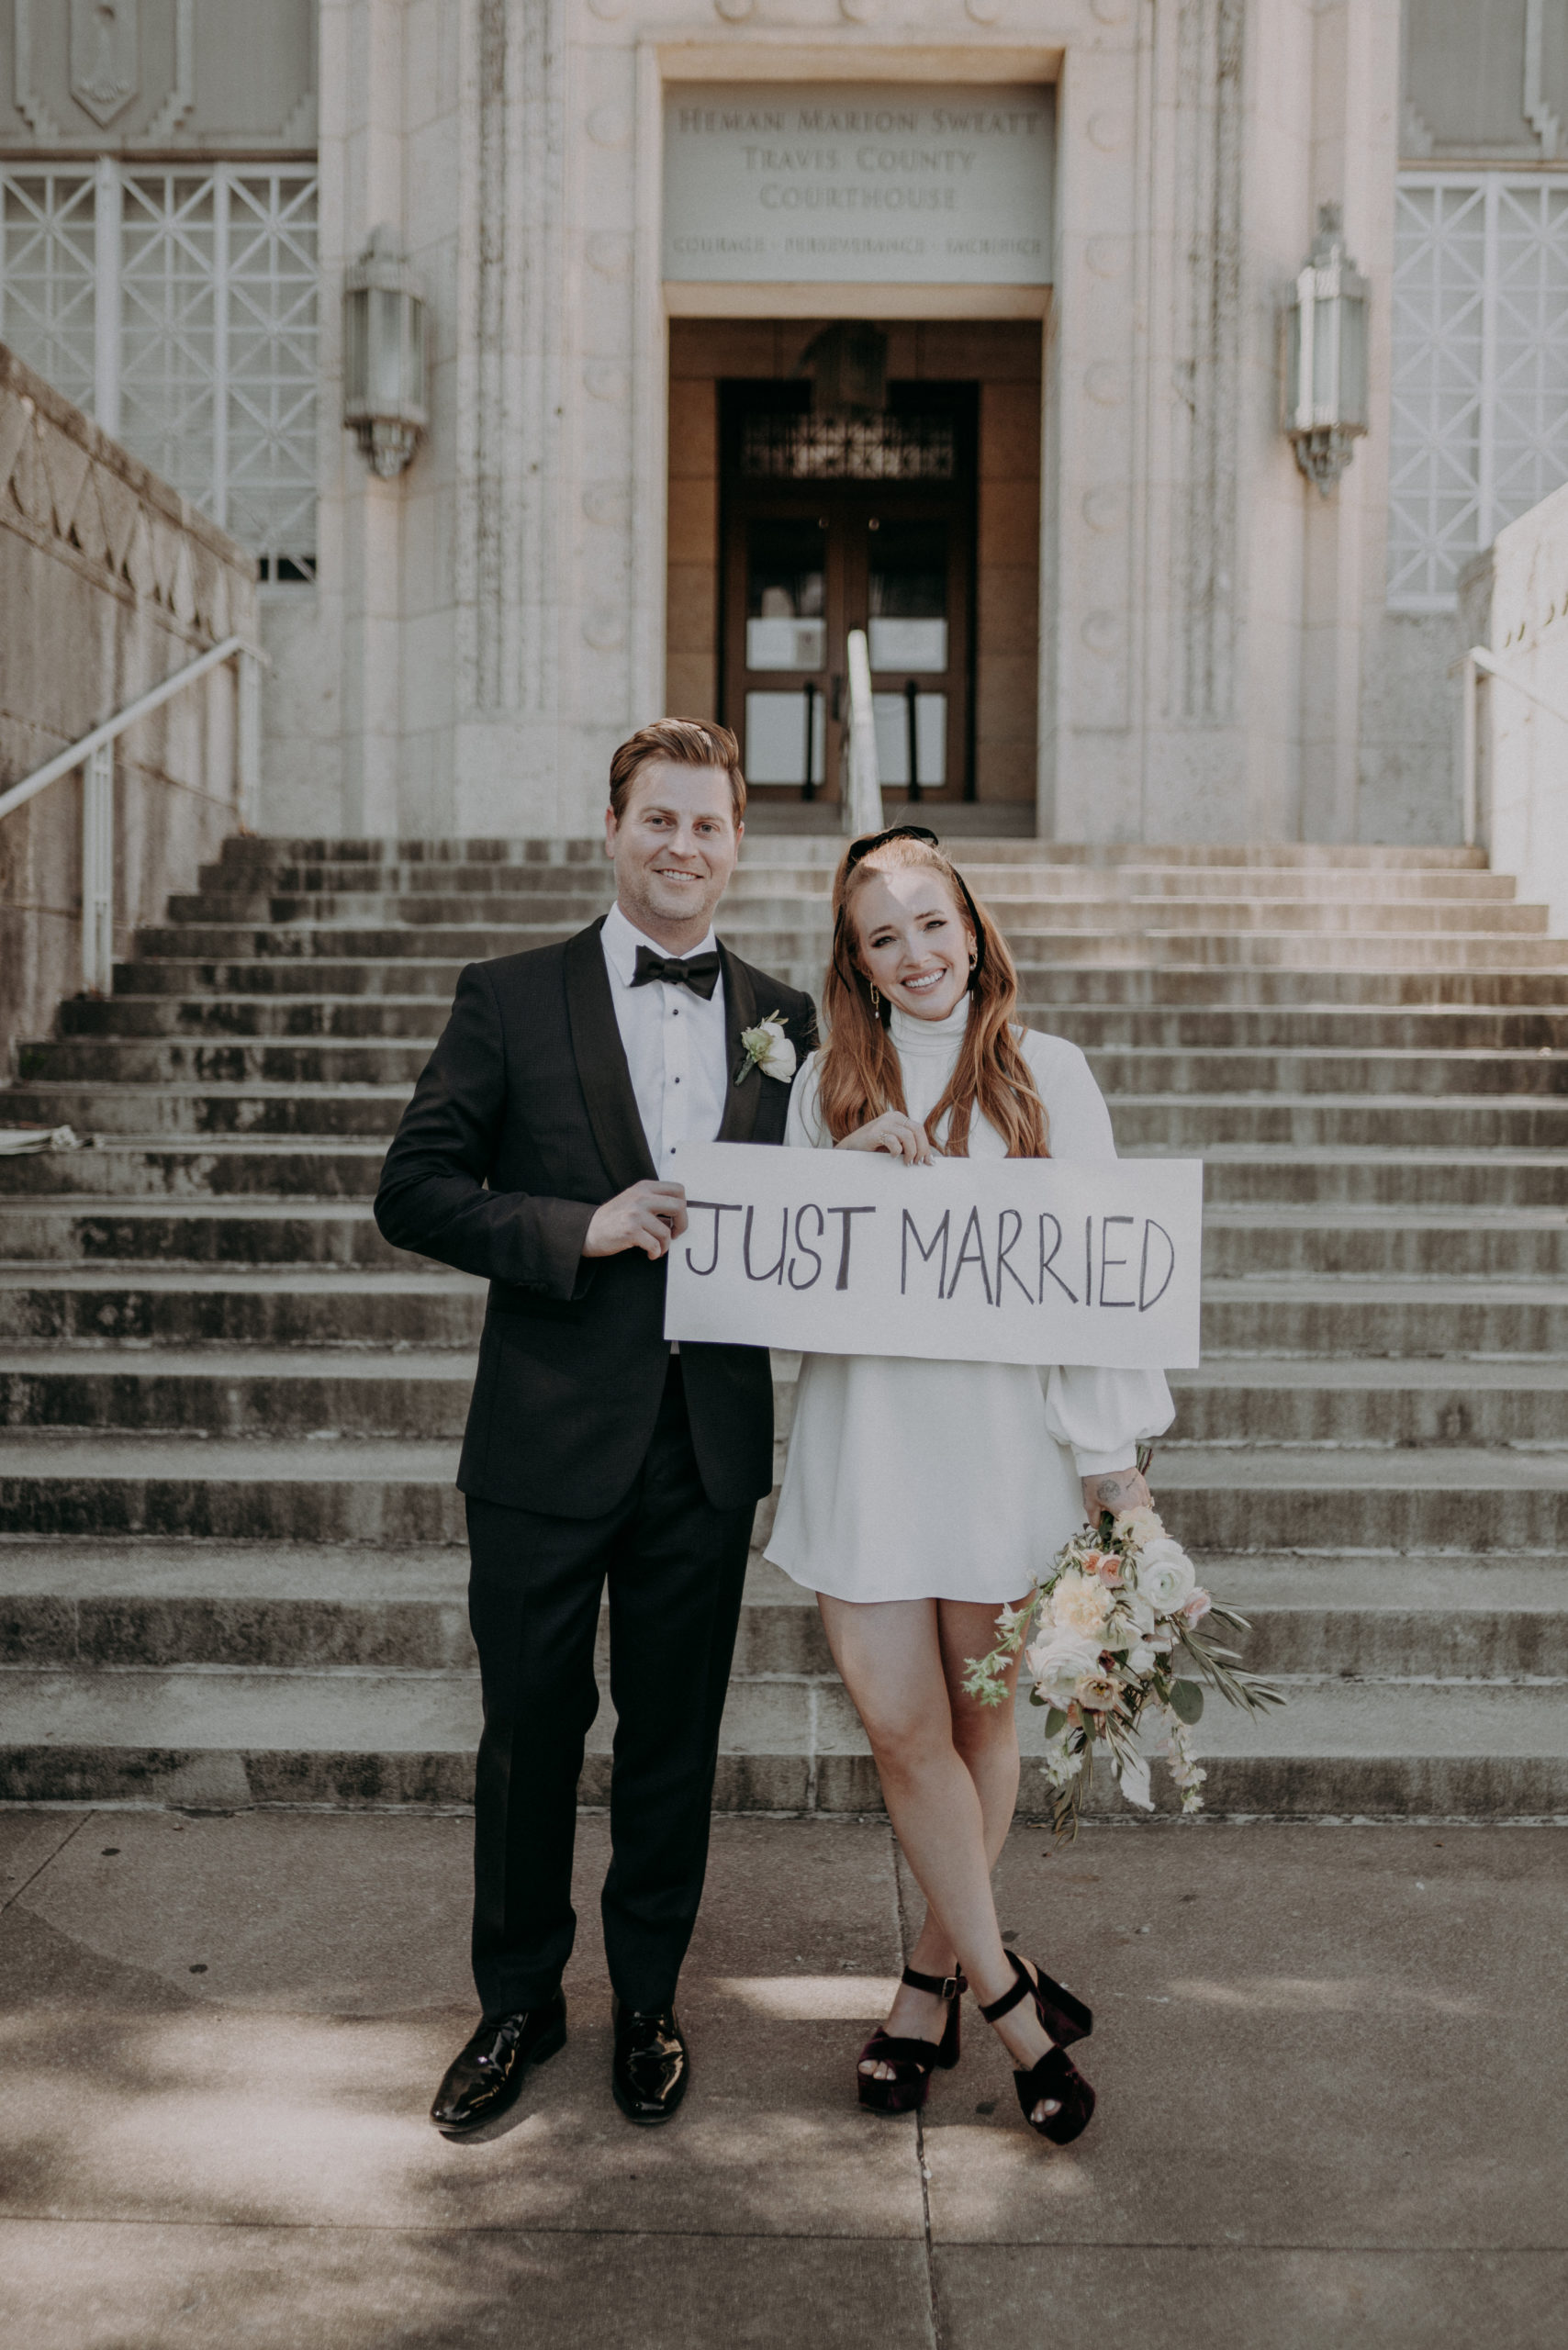 Couple in front of Courthouse holding just married sign